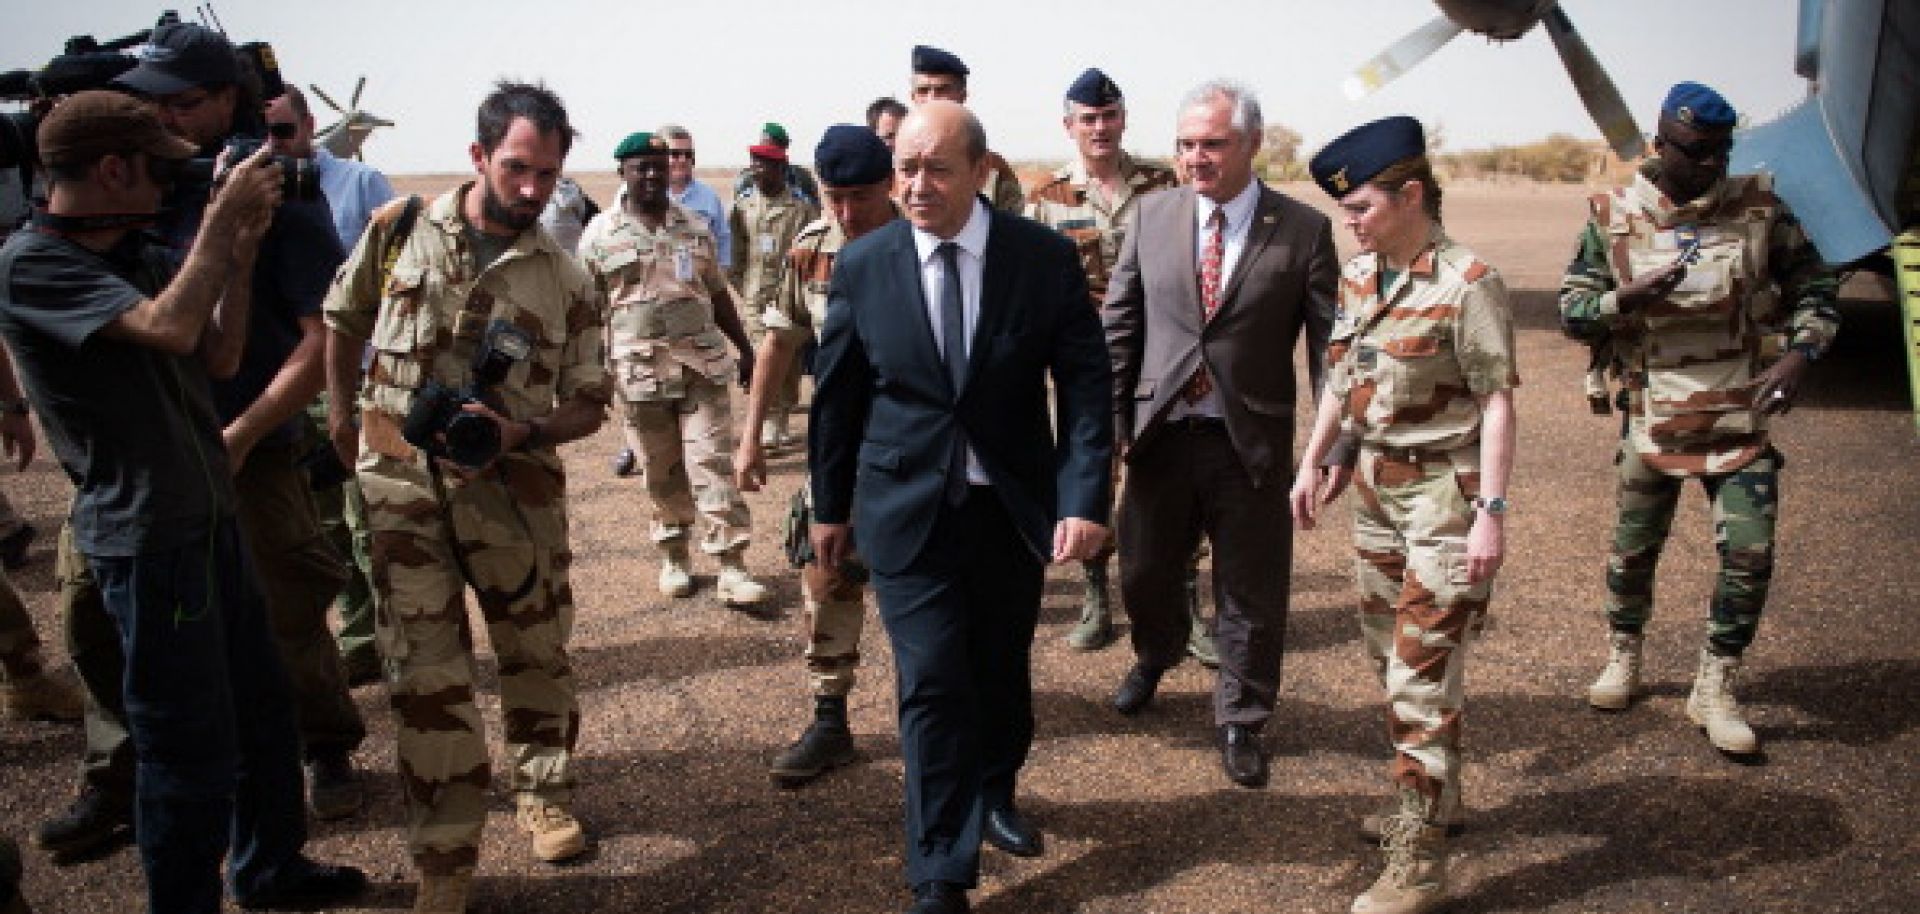 France's Adjusted Security Policy in Africa